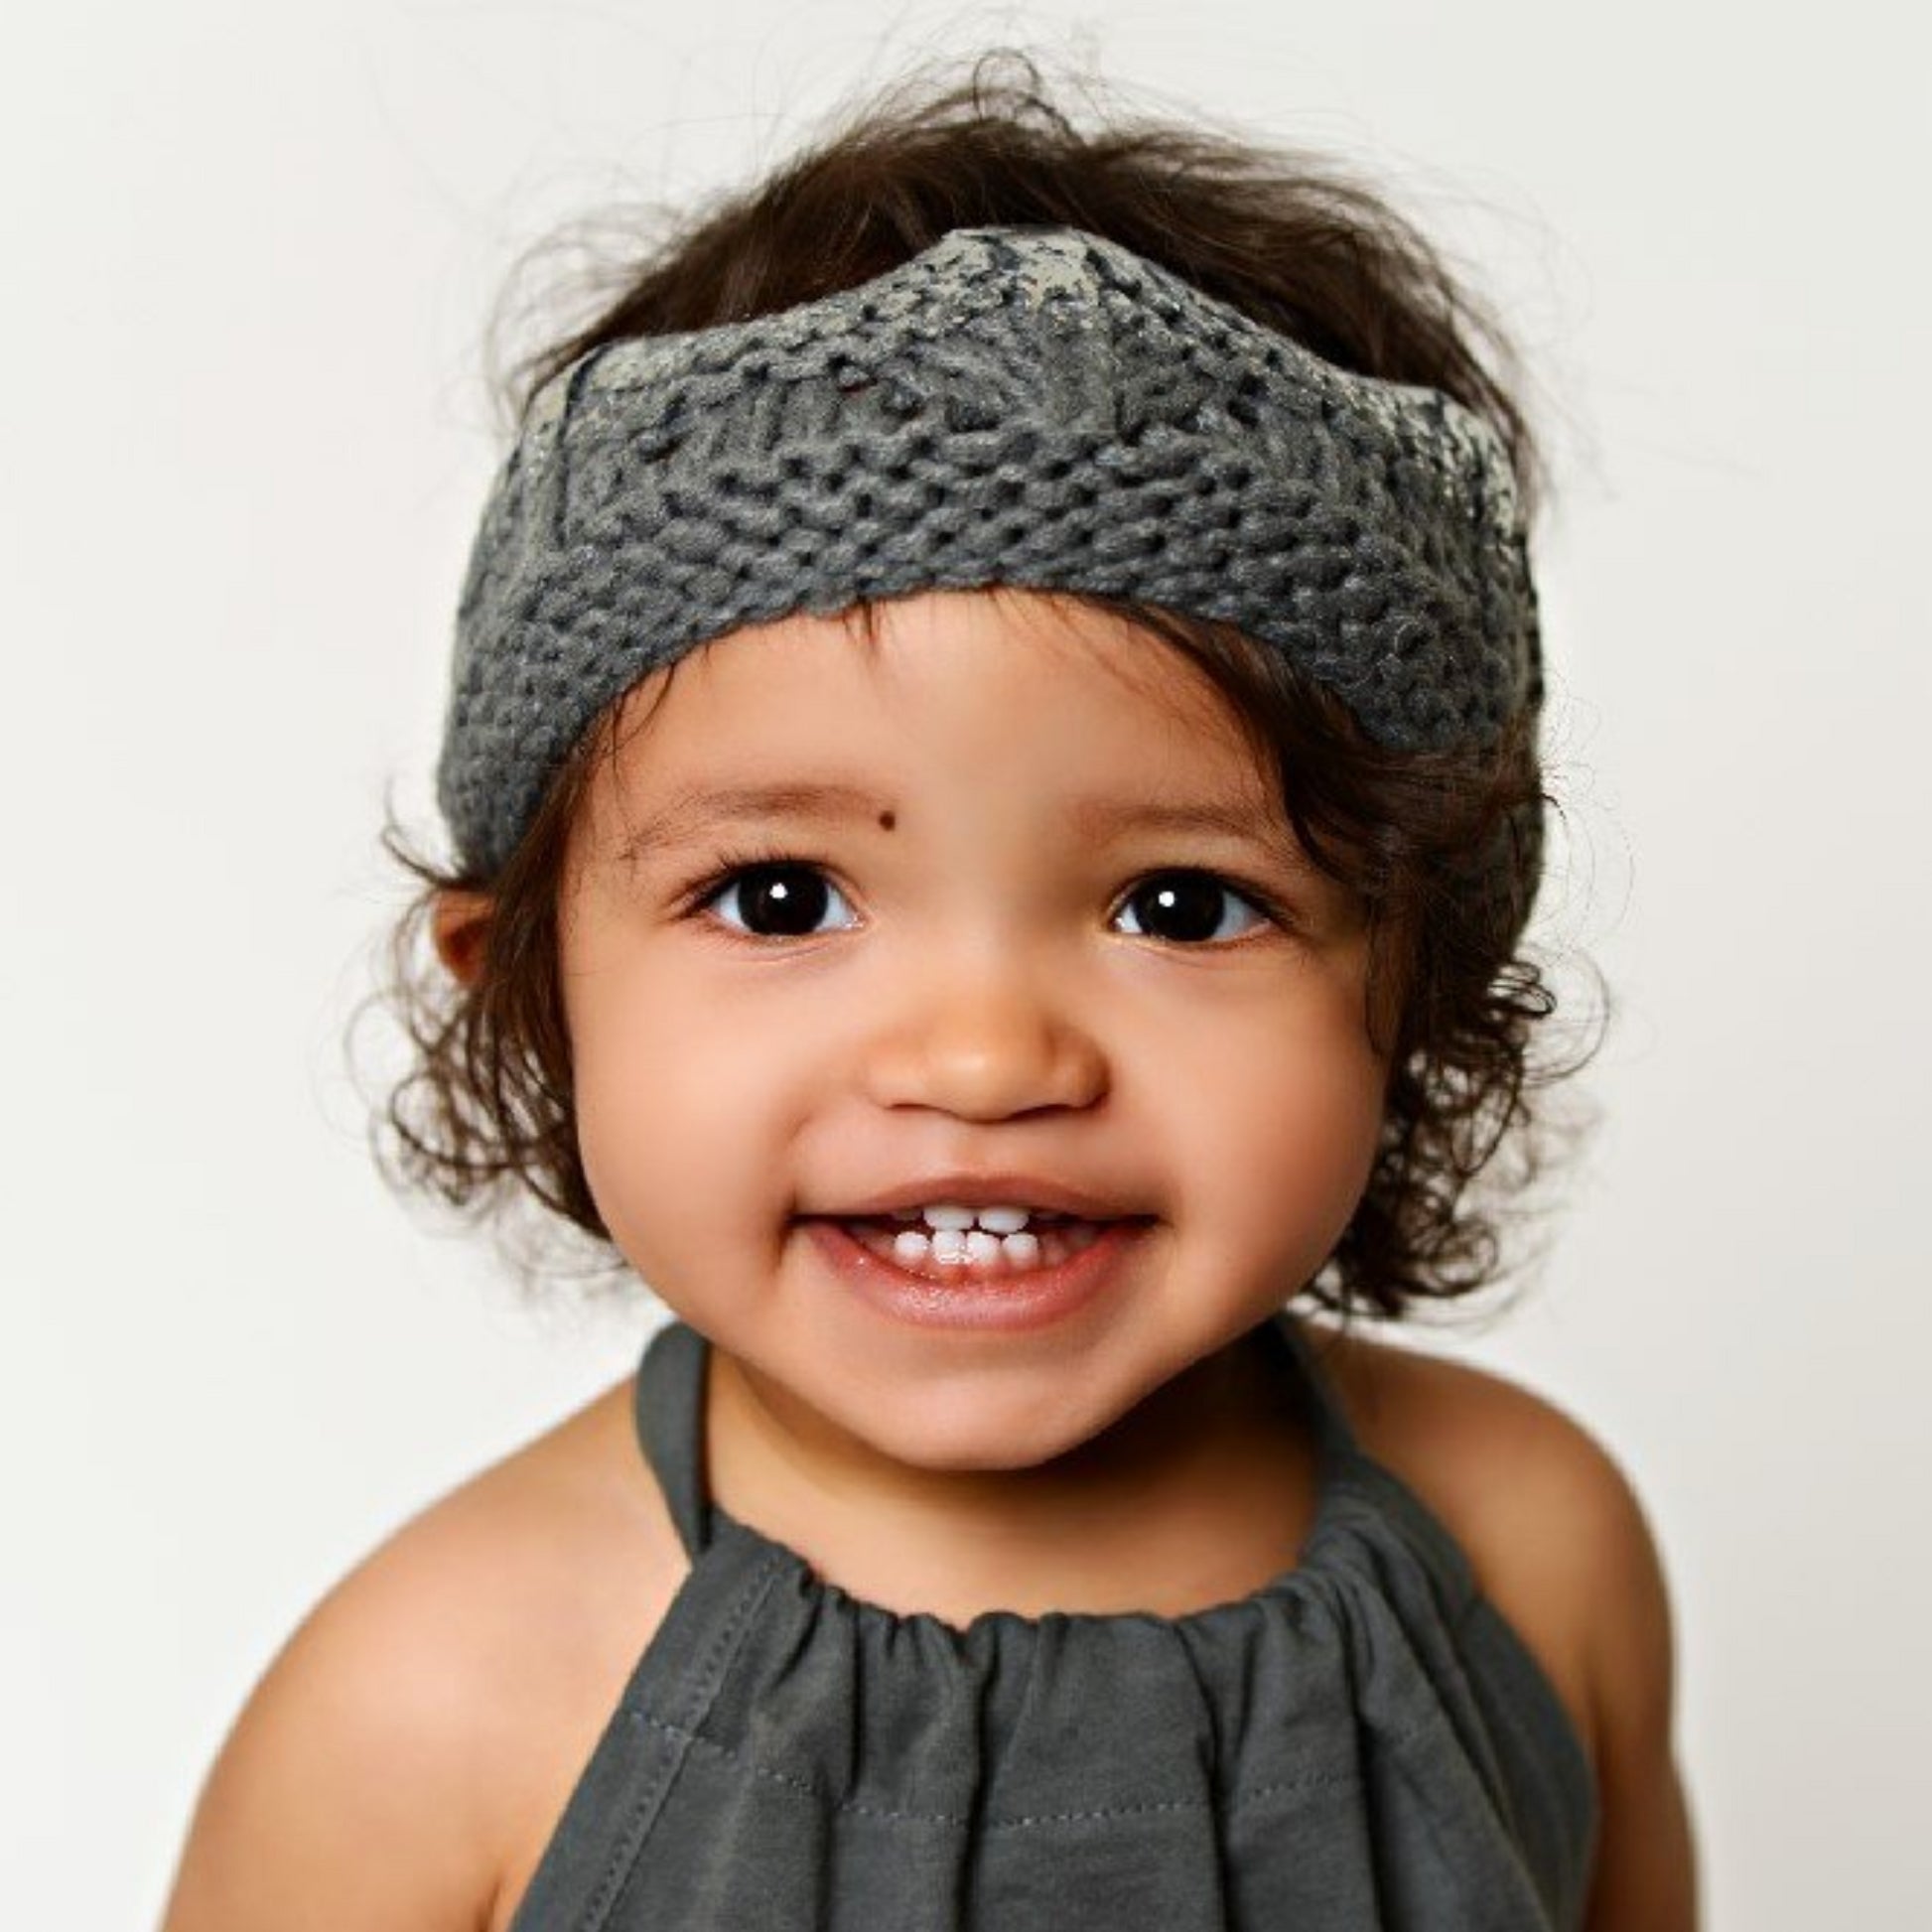 hand crochet crown for baby and toddler with metallic accent in gray with silver